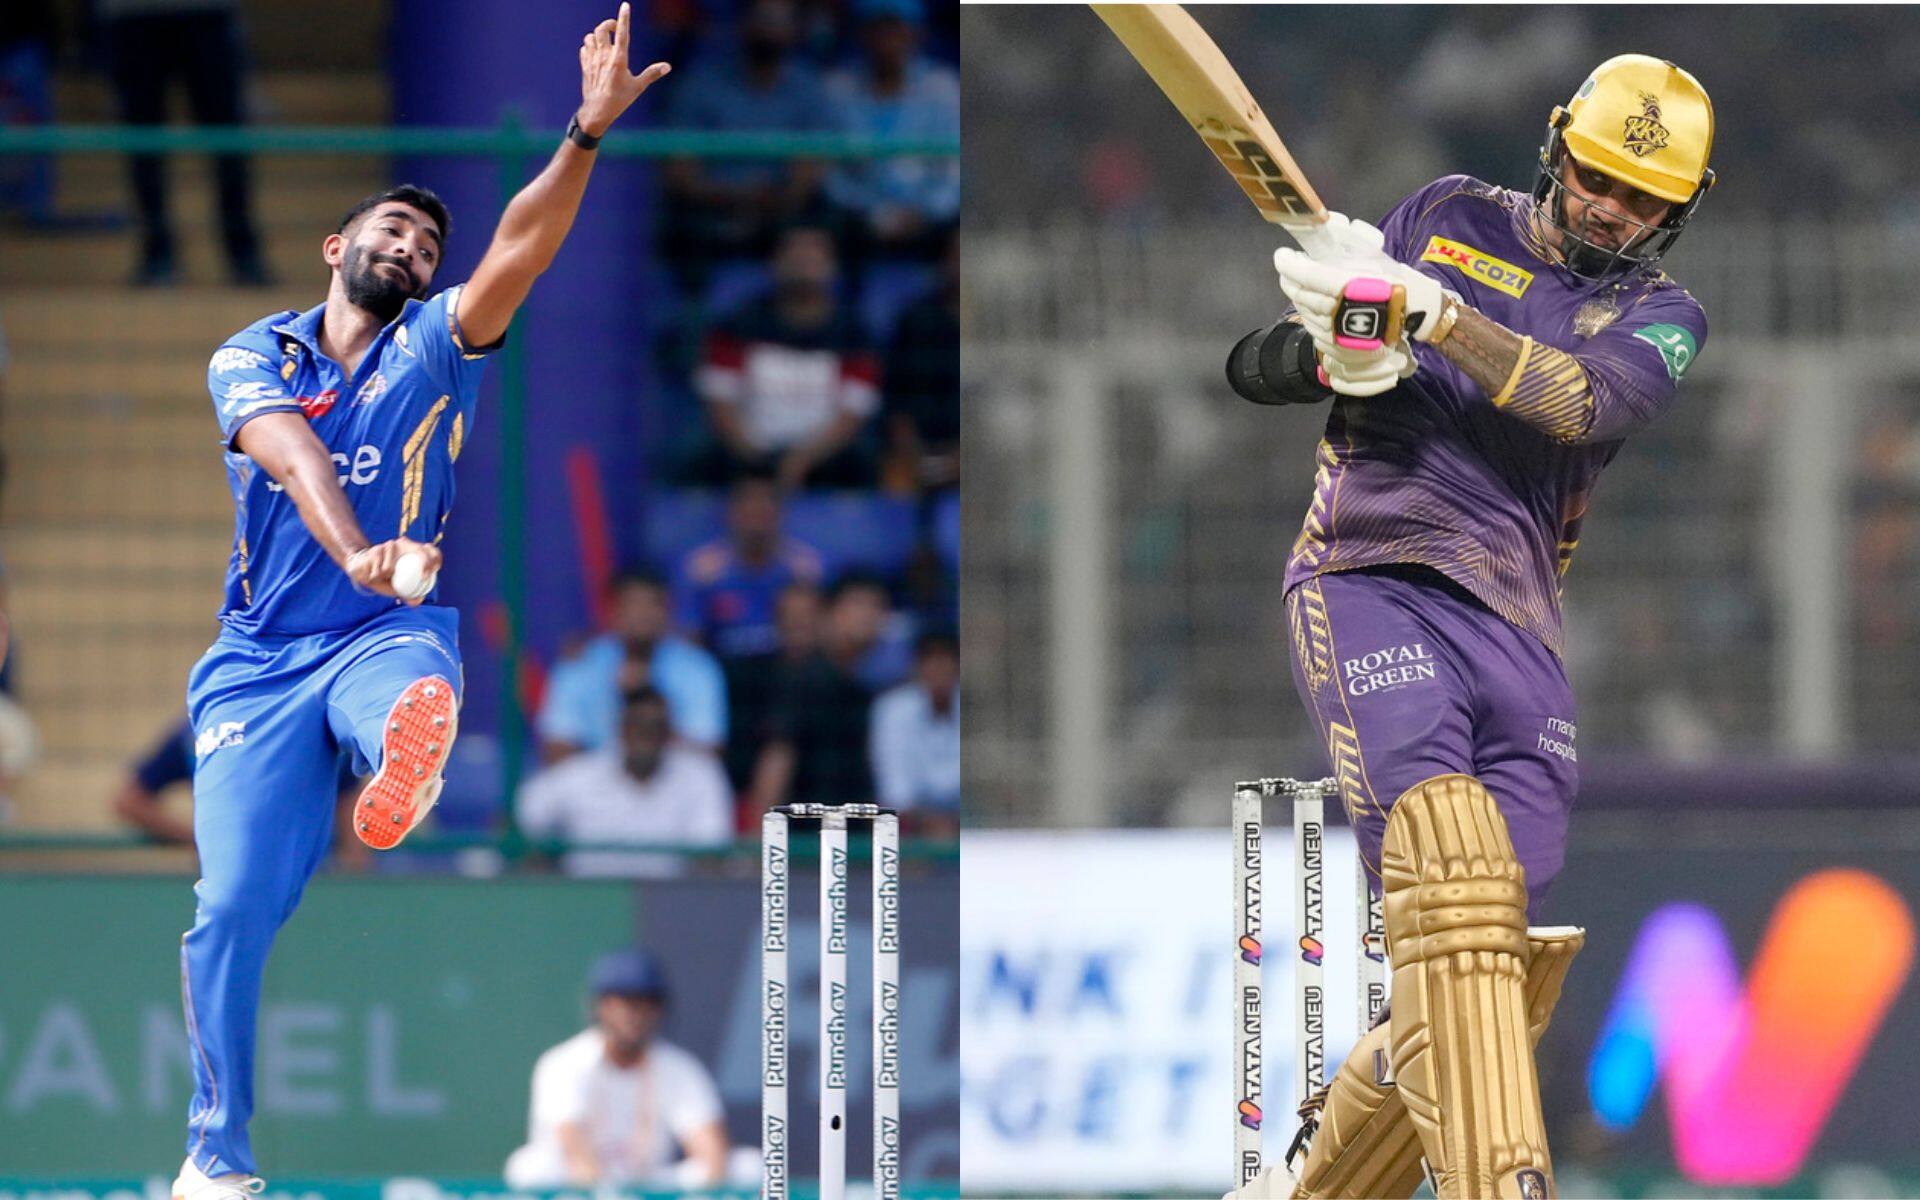 Narine vs Bumrah could decide the fate of the game [AP Photos]